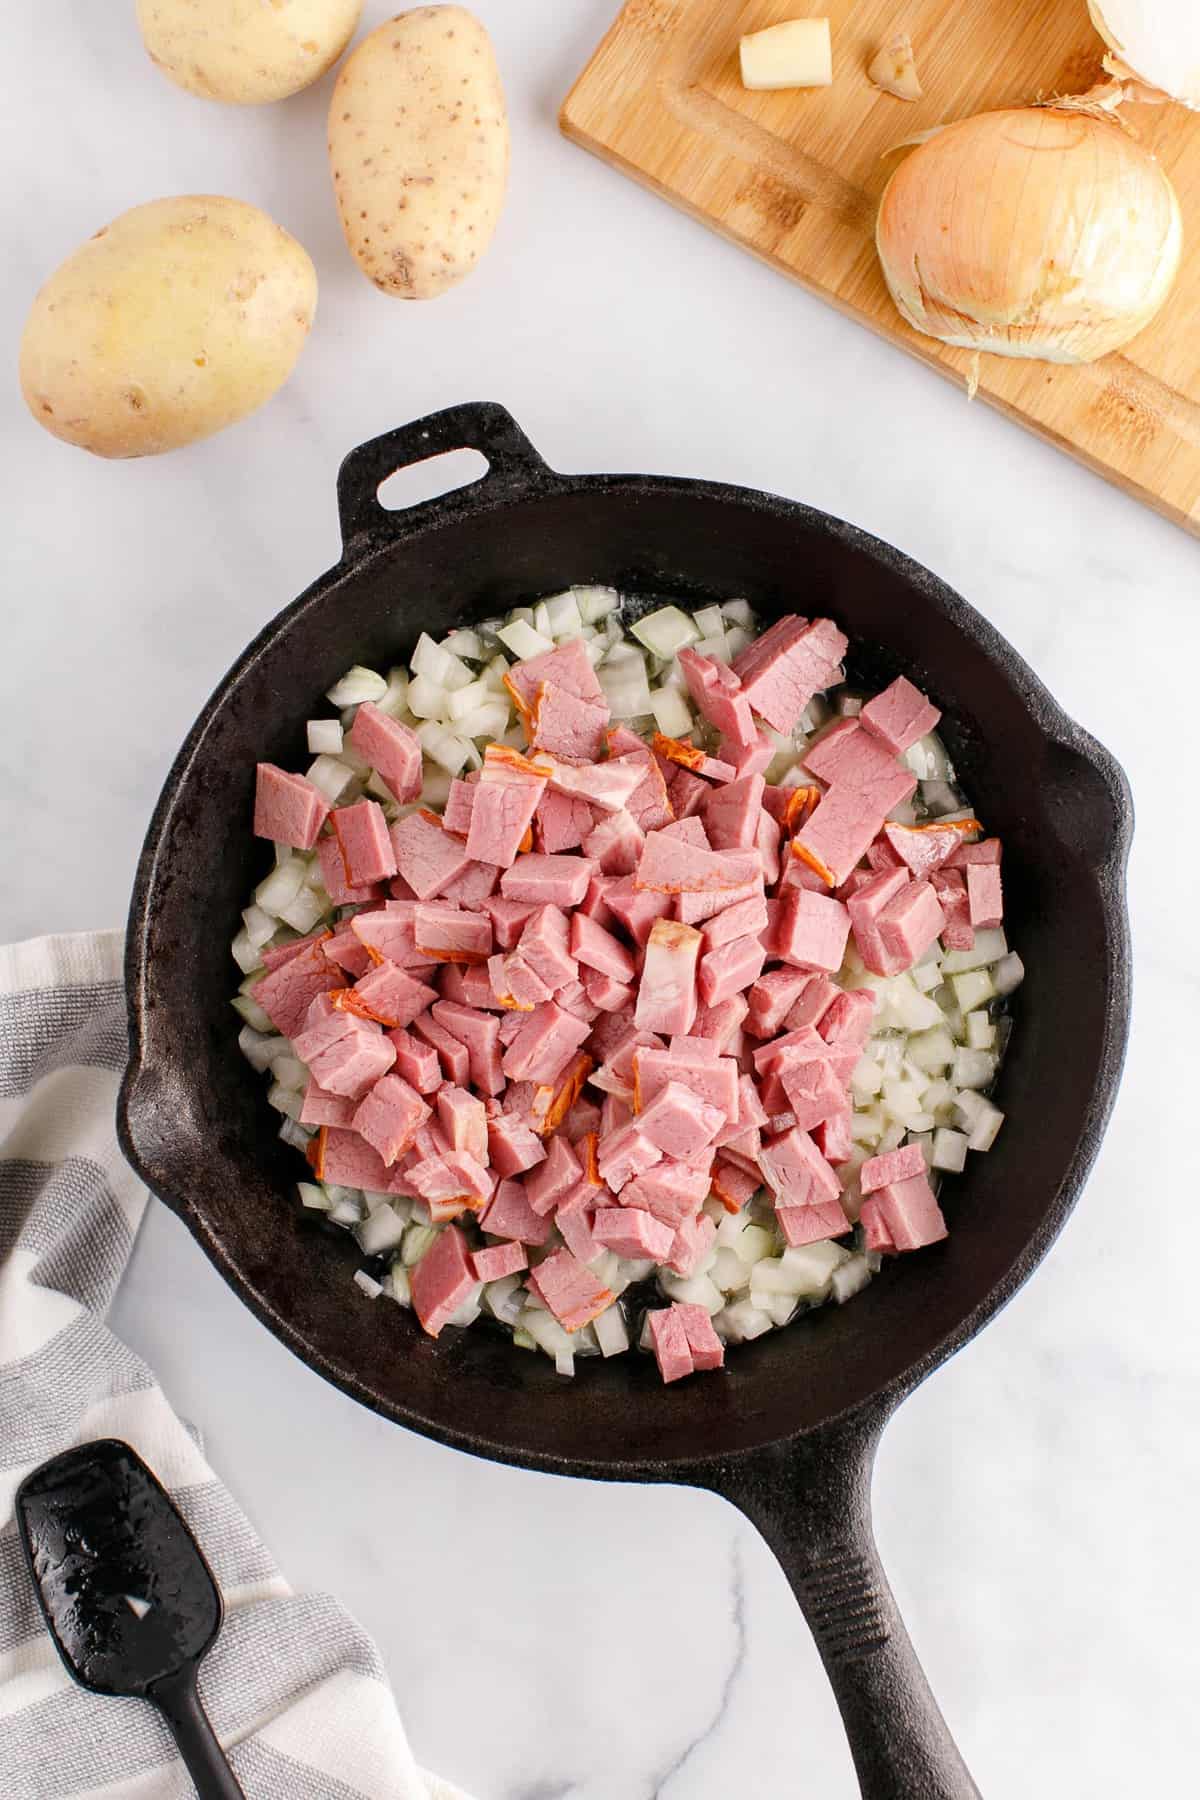 Corned beef added to skillet.